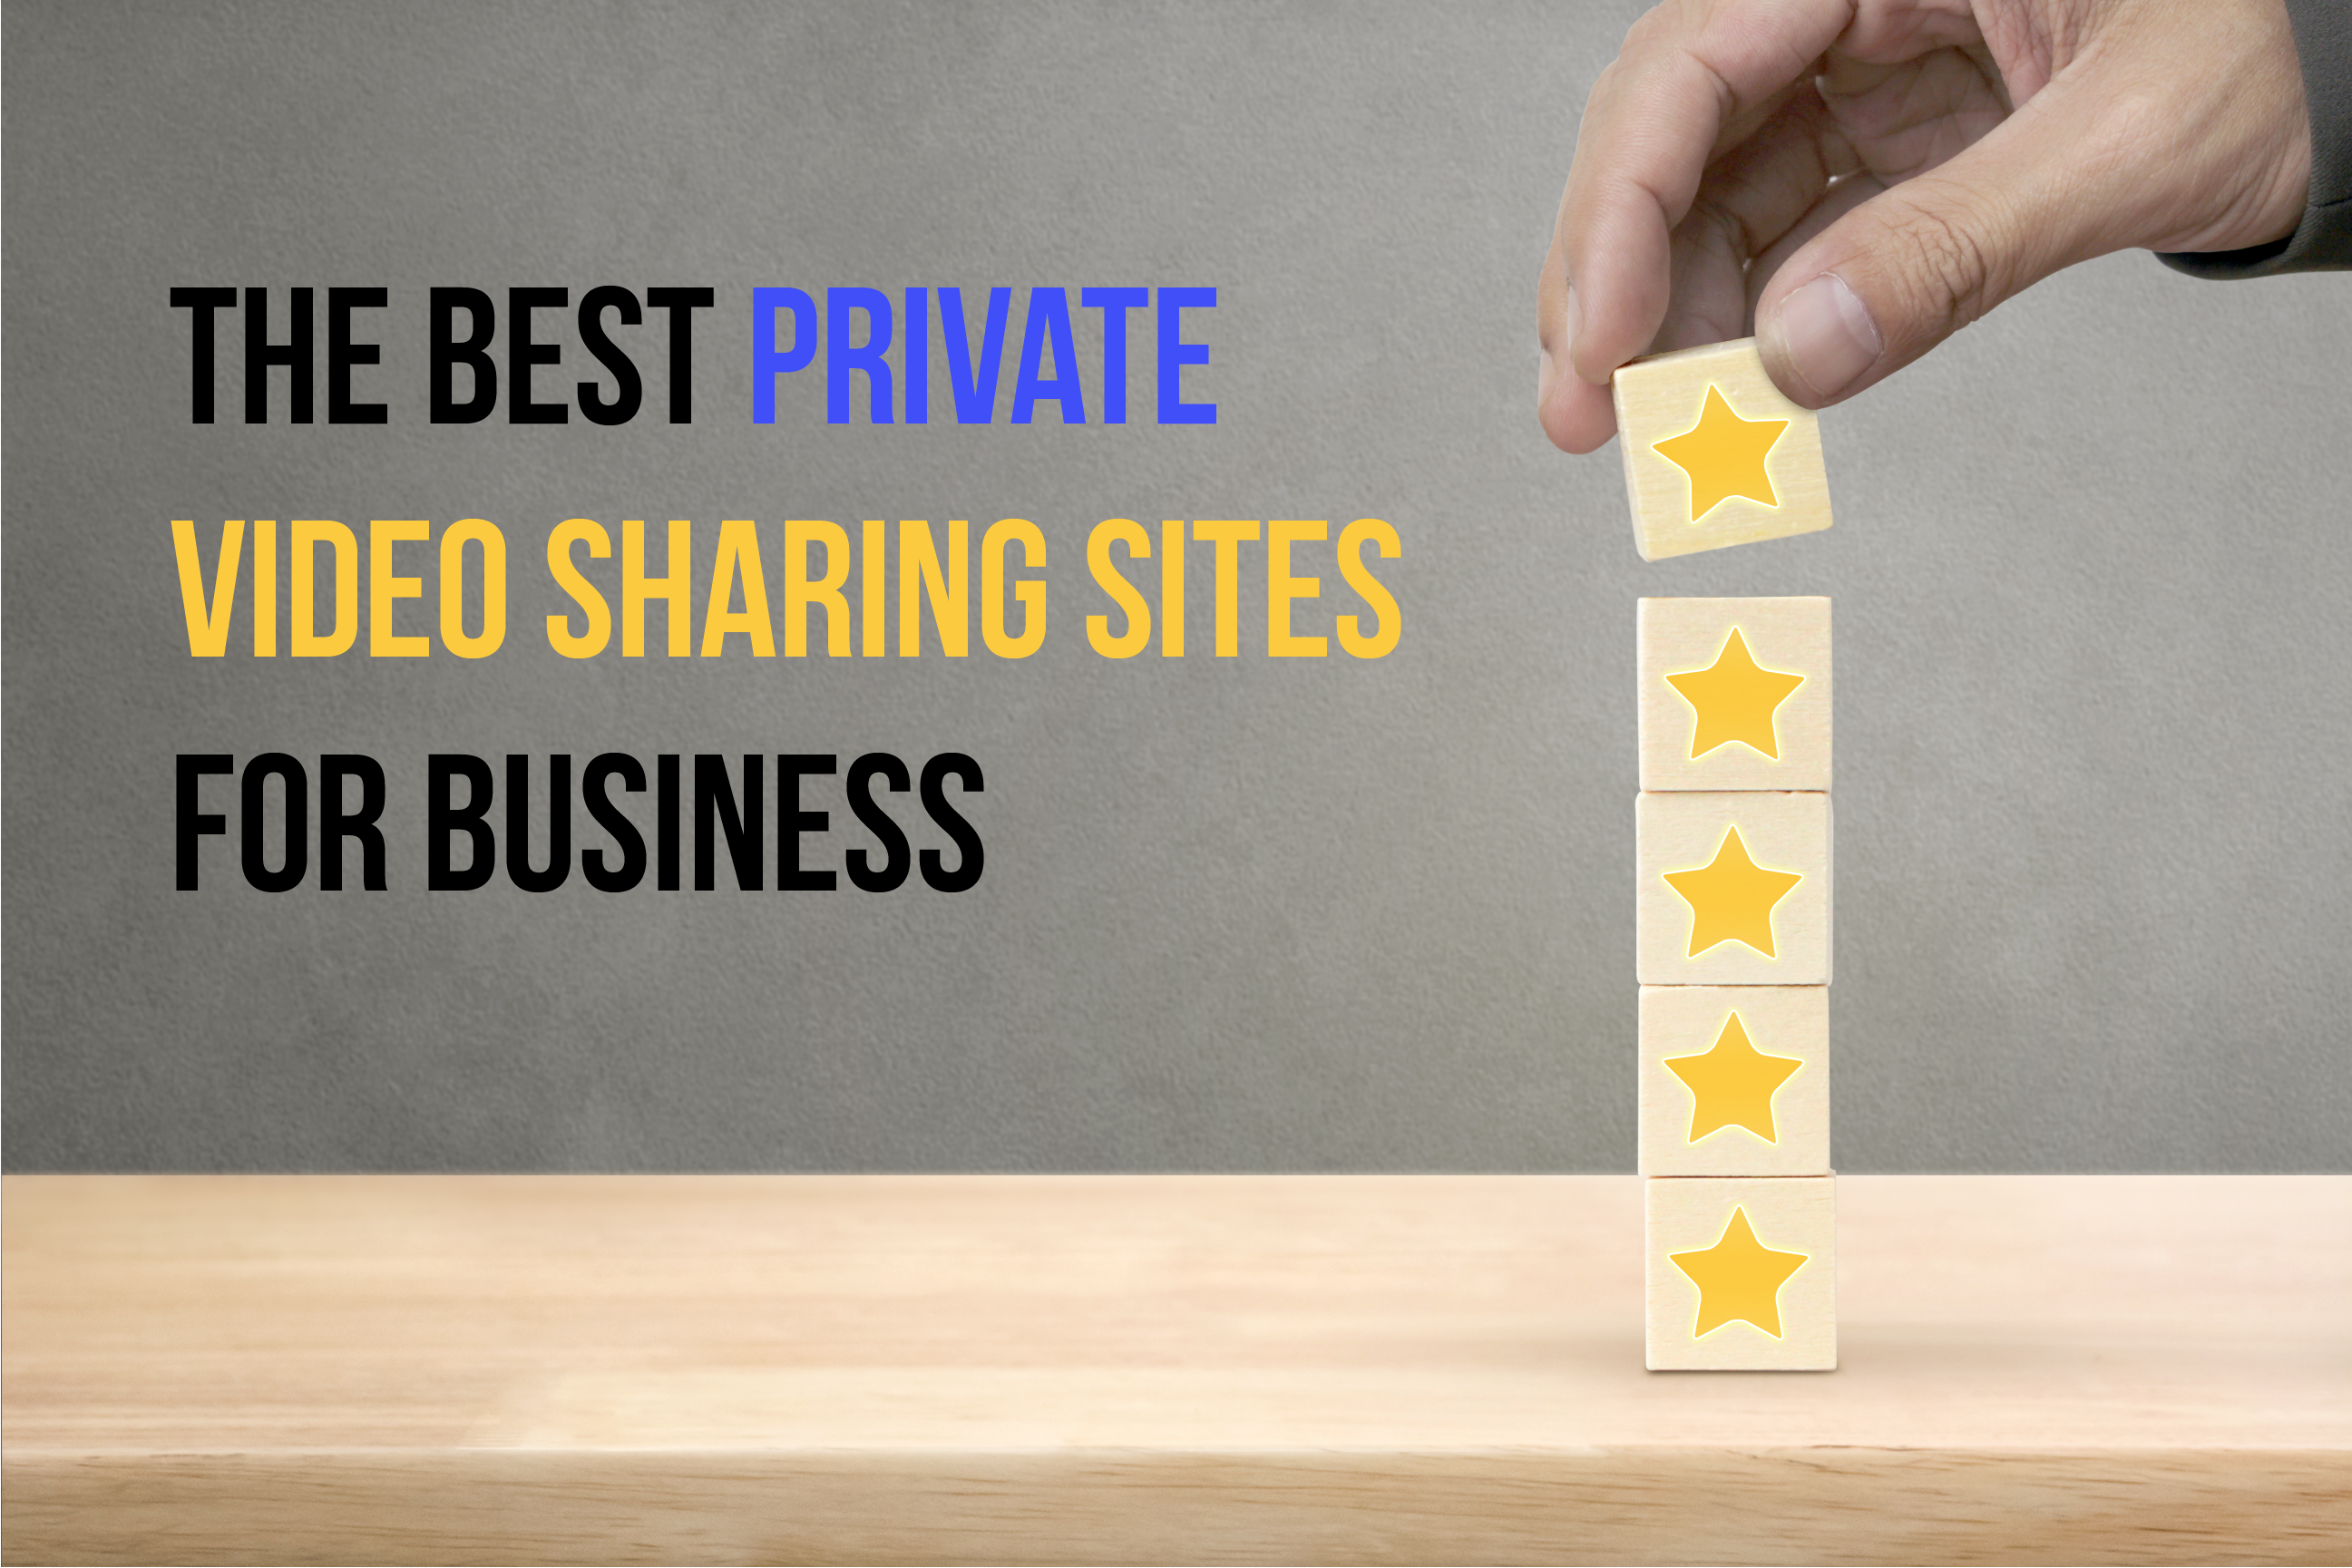 Which Is The Best Private Video Sharing Site For Business?